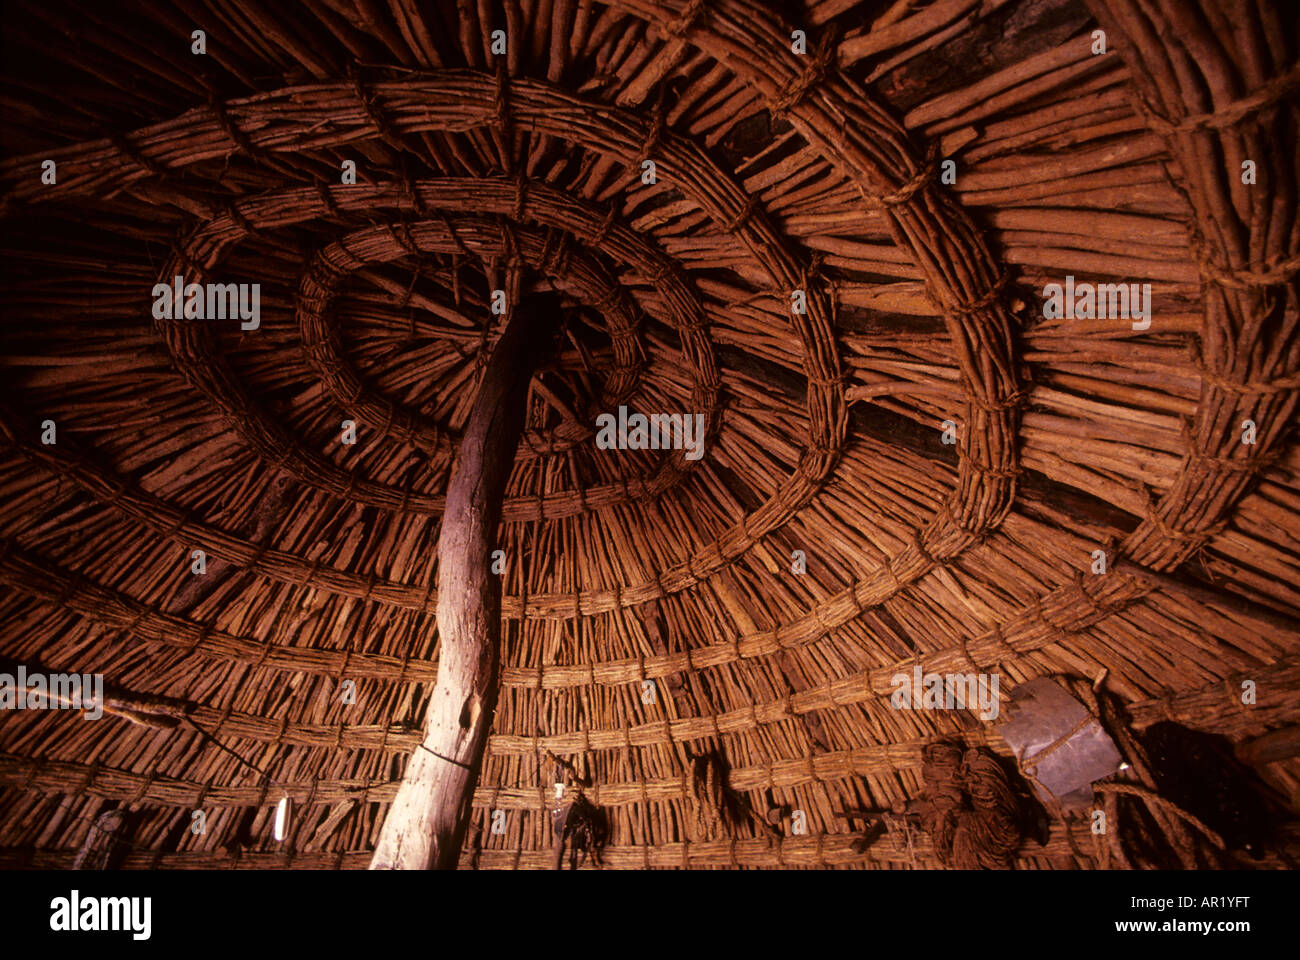 The interior of a nomadic hut in the Thar desert, Rajasthan IN Stock Photo